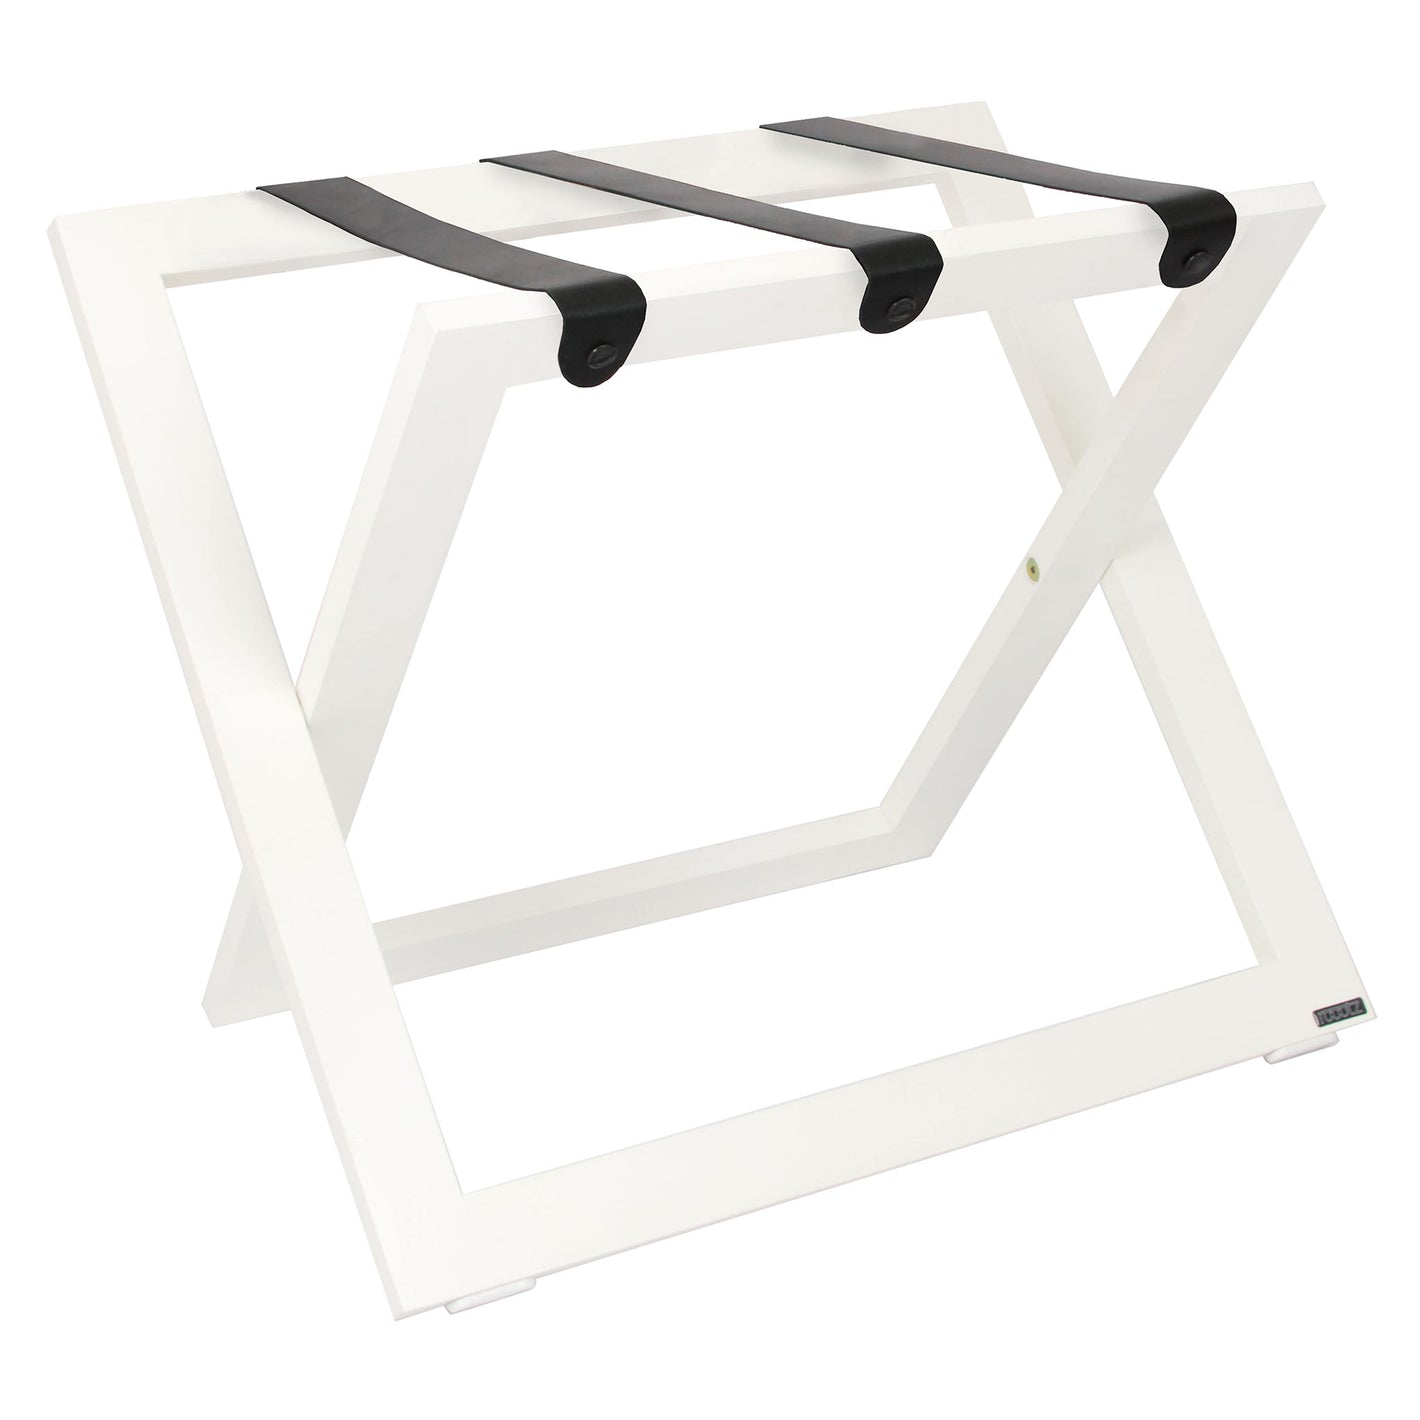 Roootz compact white wooden hotel luggage rack with black leather straps